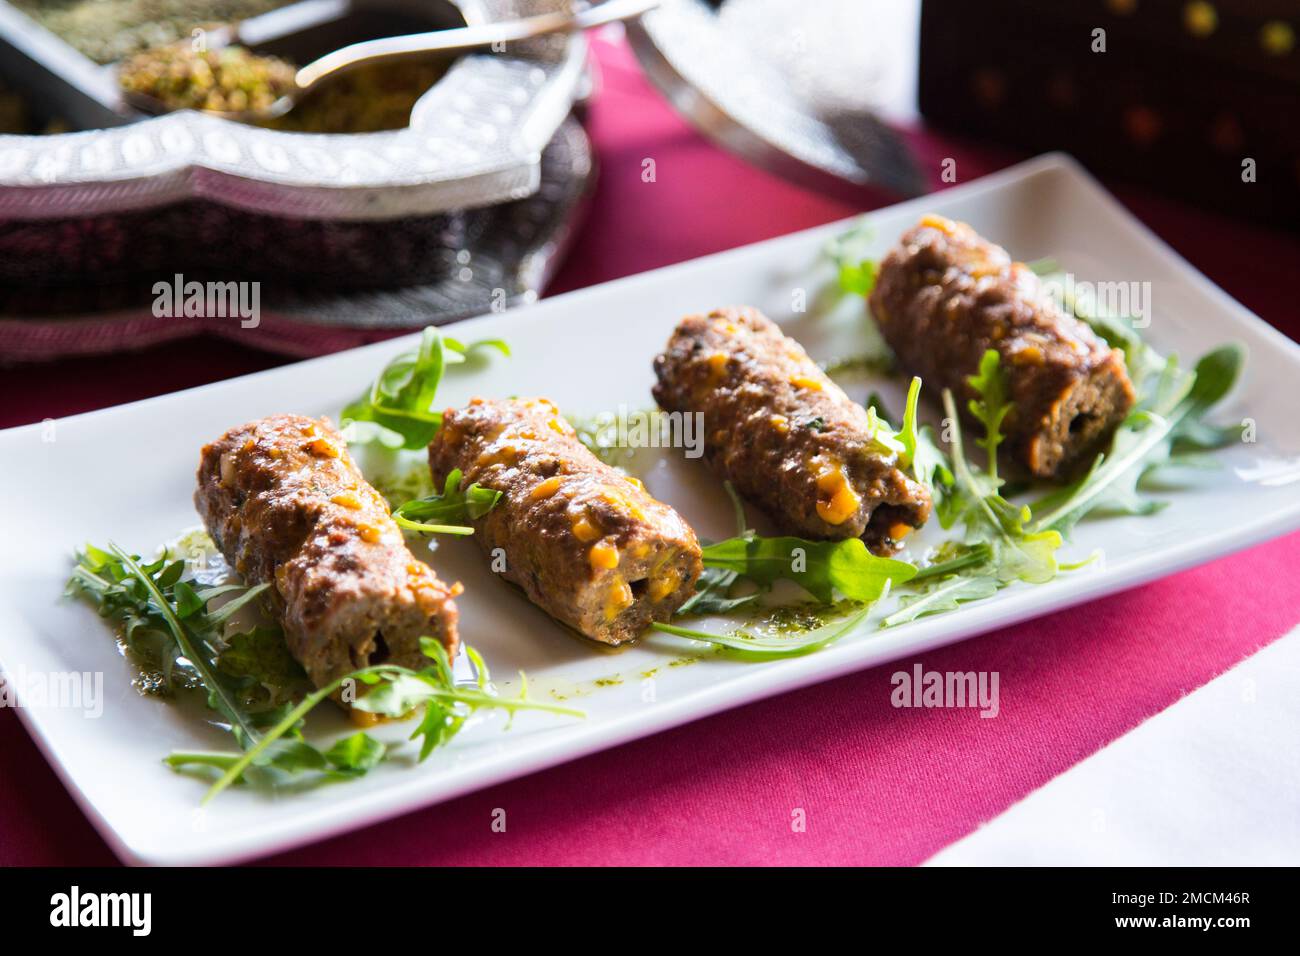 Frankies in Mumbai and Kathi rolls in Kolkata are synonymous of street food. Traditional Indian Food. Stock Photo